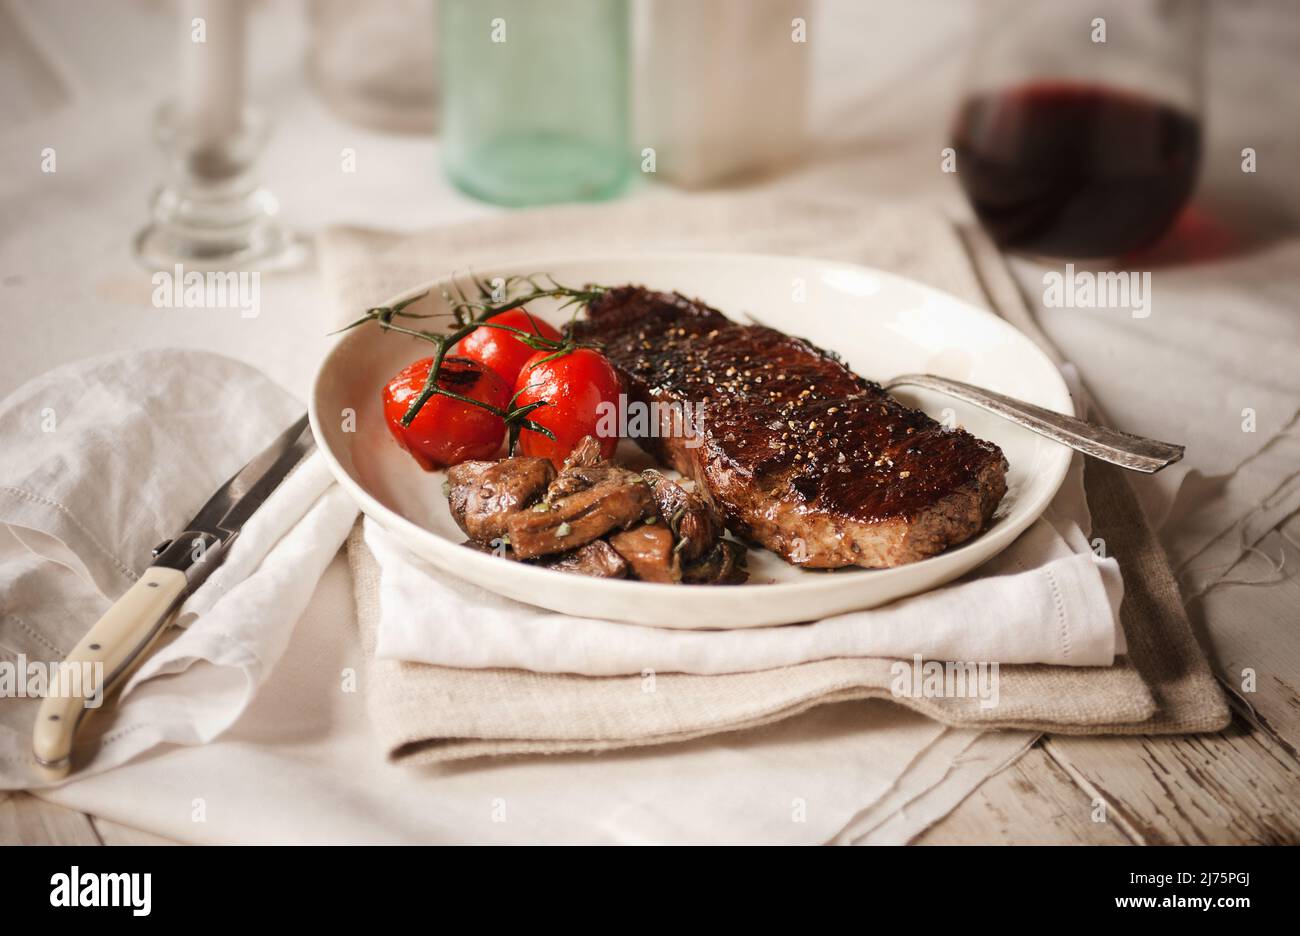 Steak with roasted mushrooms and tomatoes Stock Photo